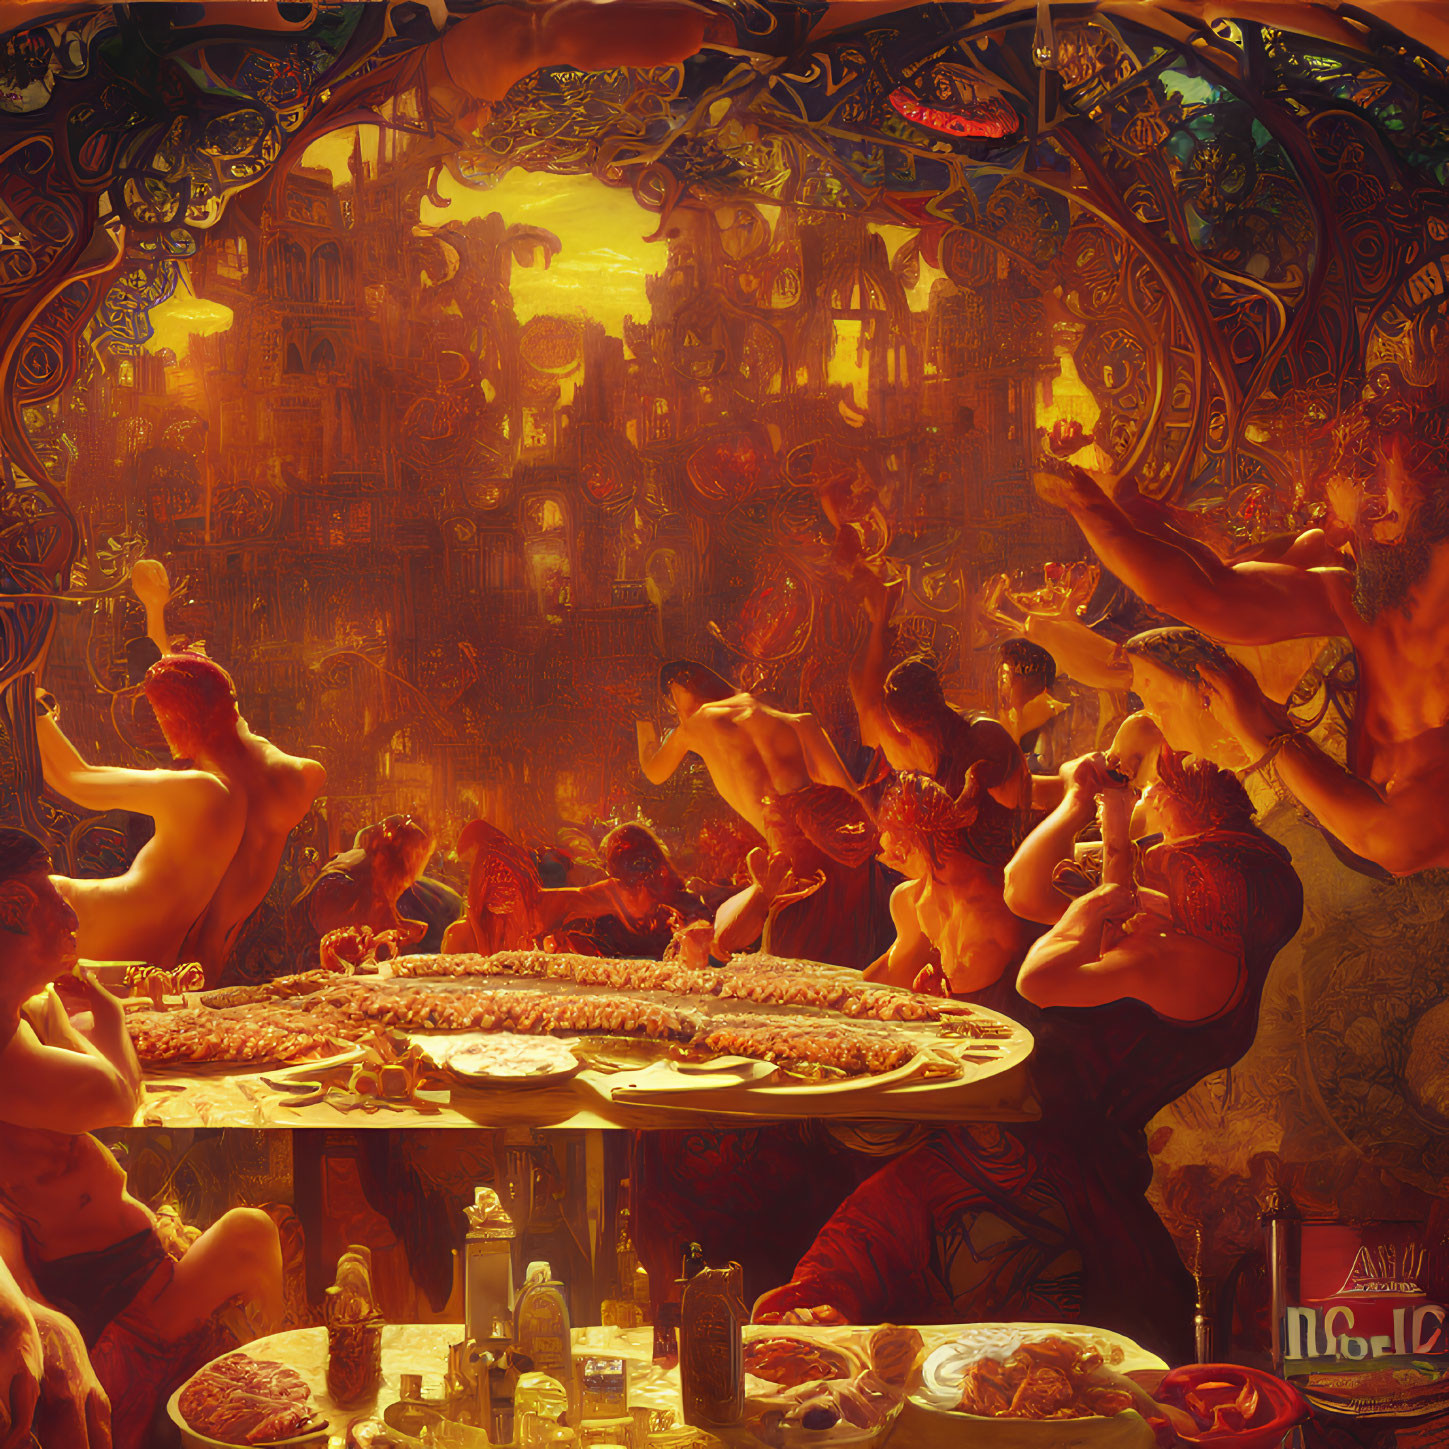 Opulent Art Nouveau feast with classical figures and ornate architecture